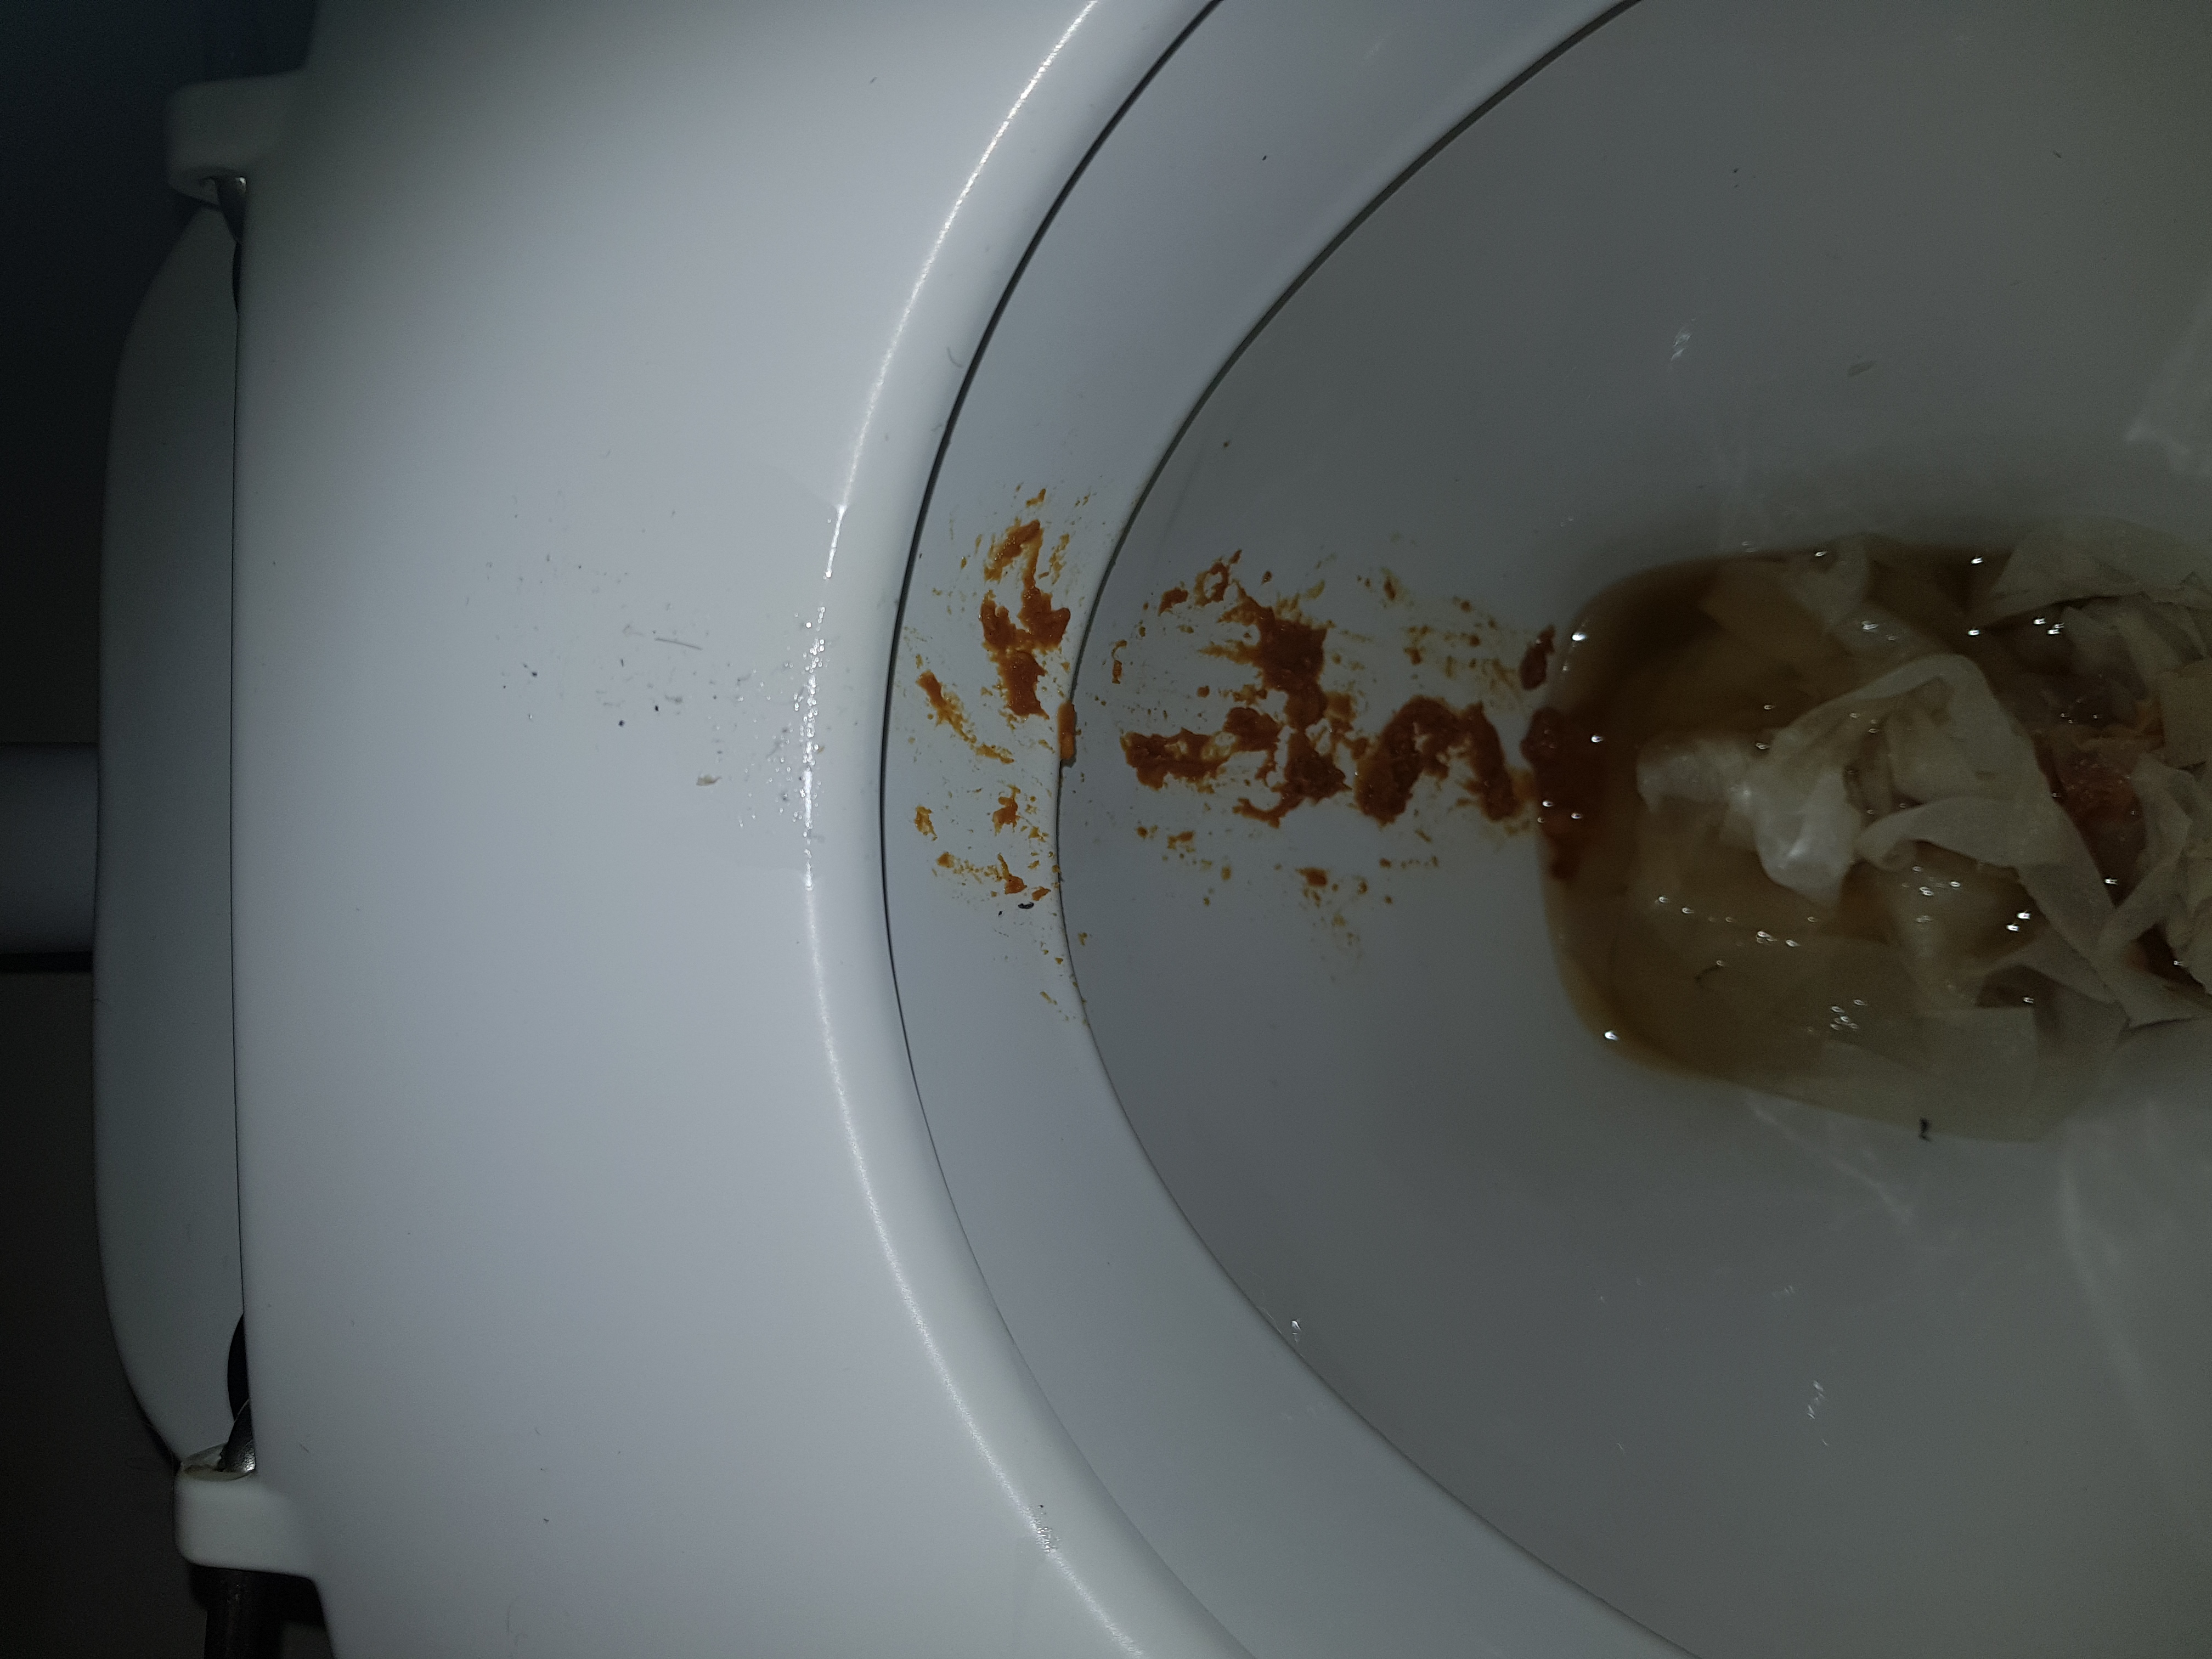 Badly needed loose and sloppy shit on my mates loo